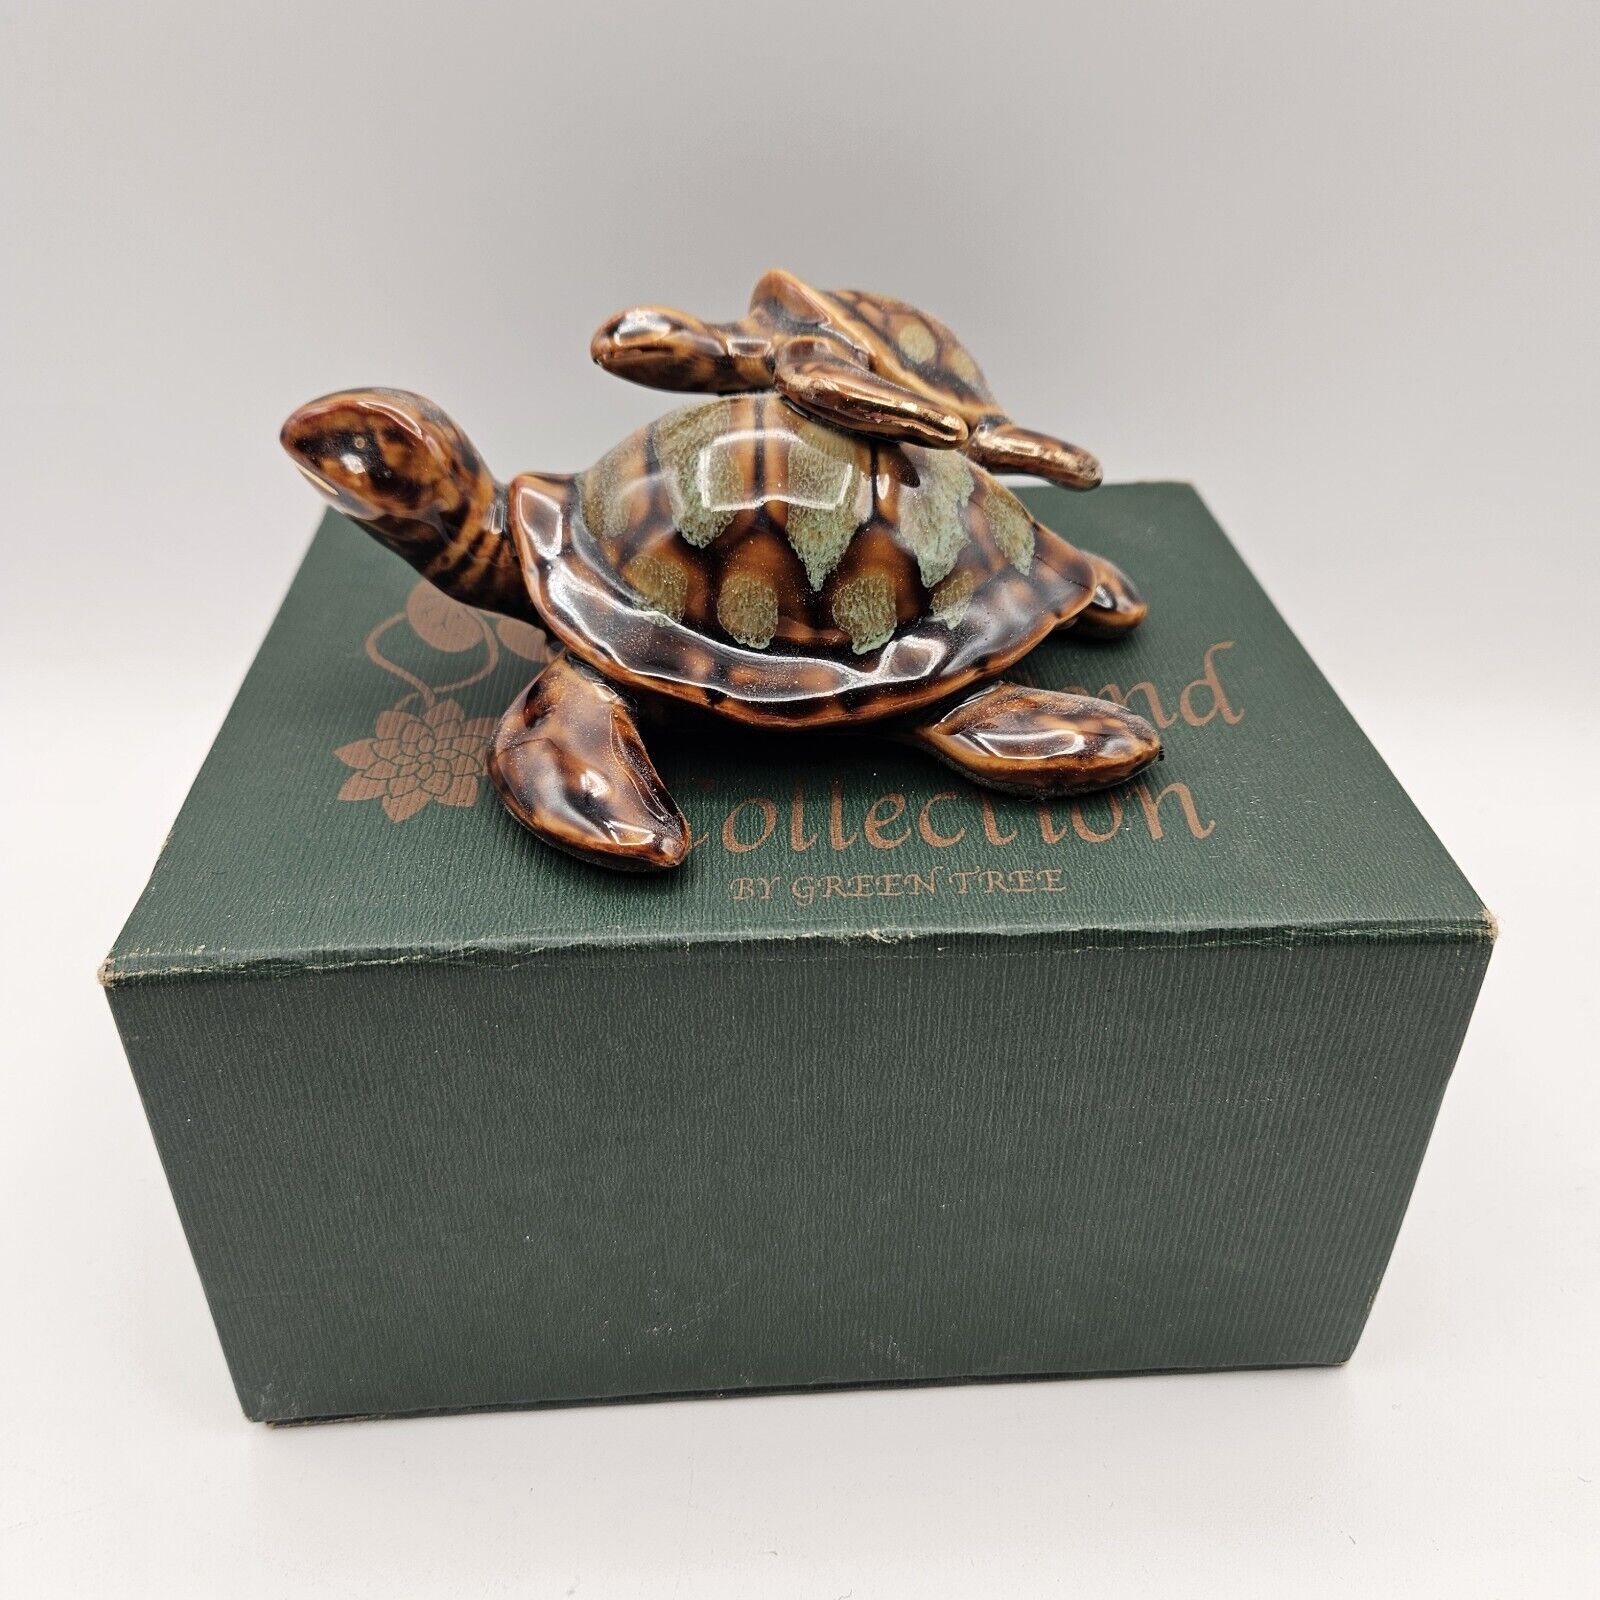 Golden pond collection by green tree, ceramic turtle mom and baby Figurine